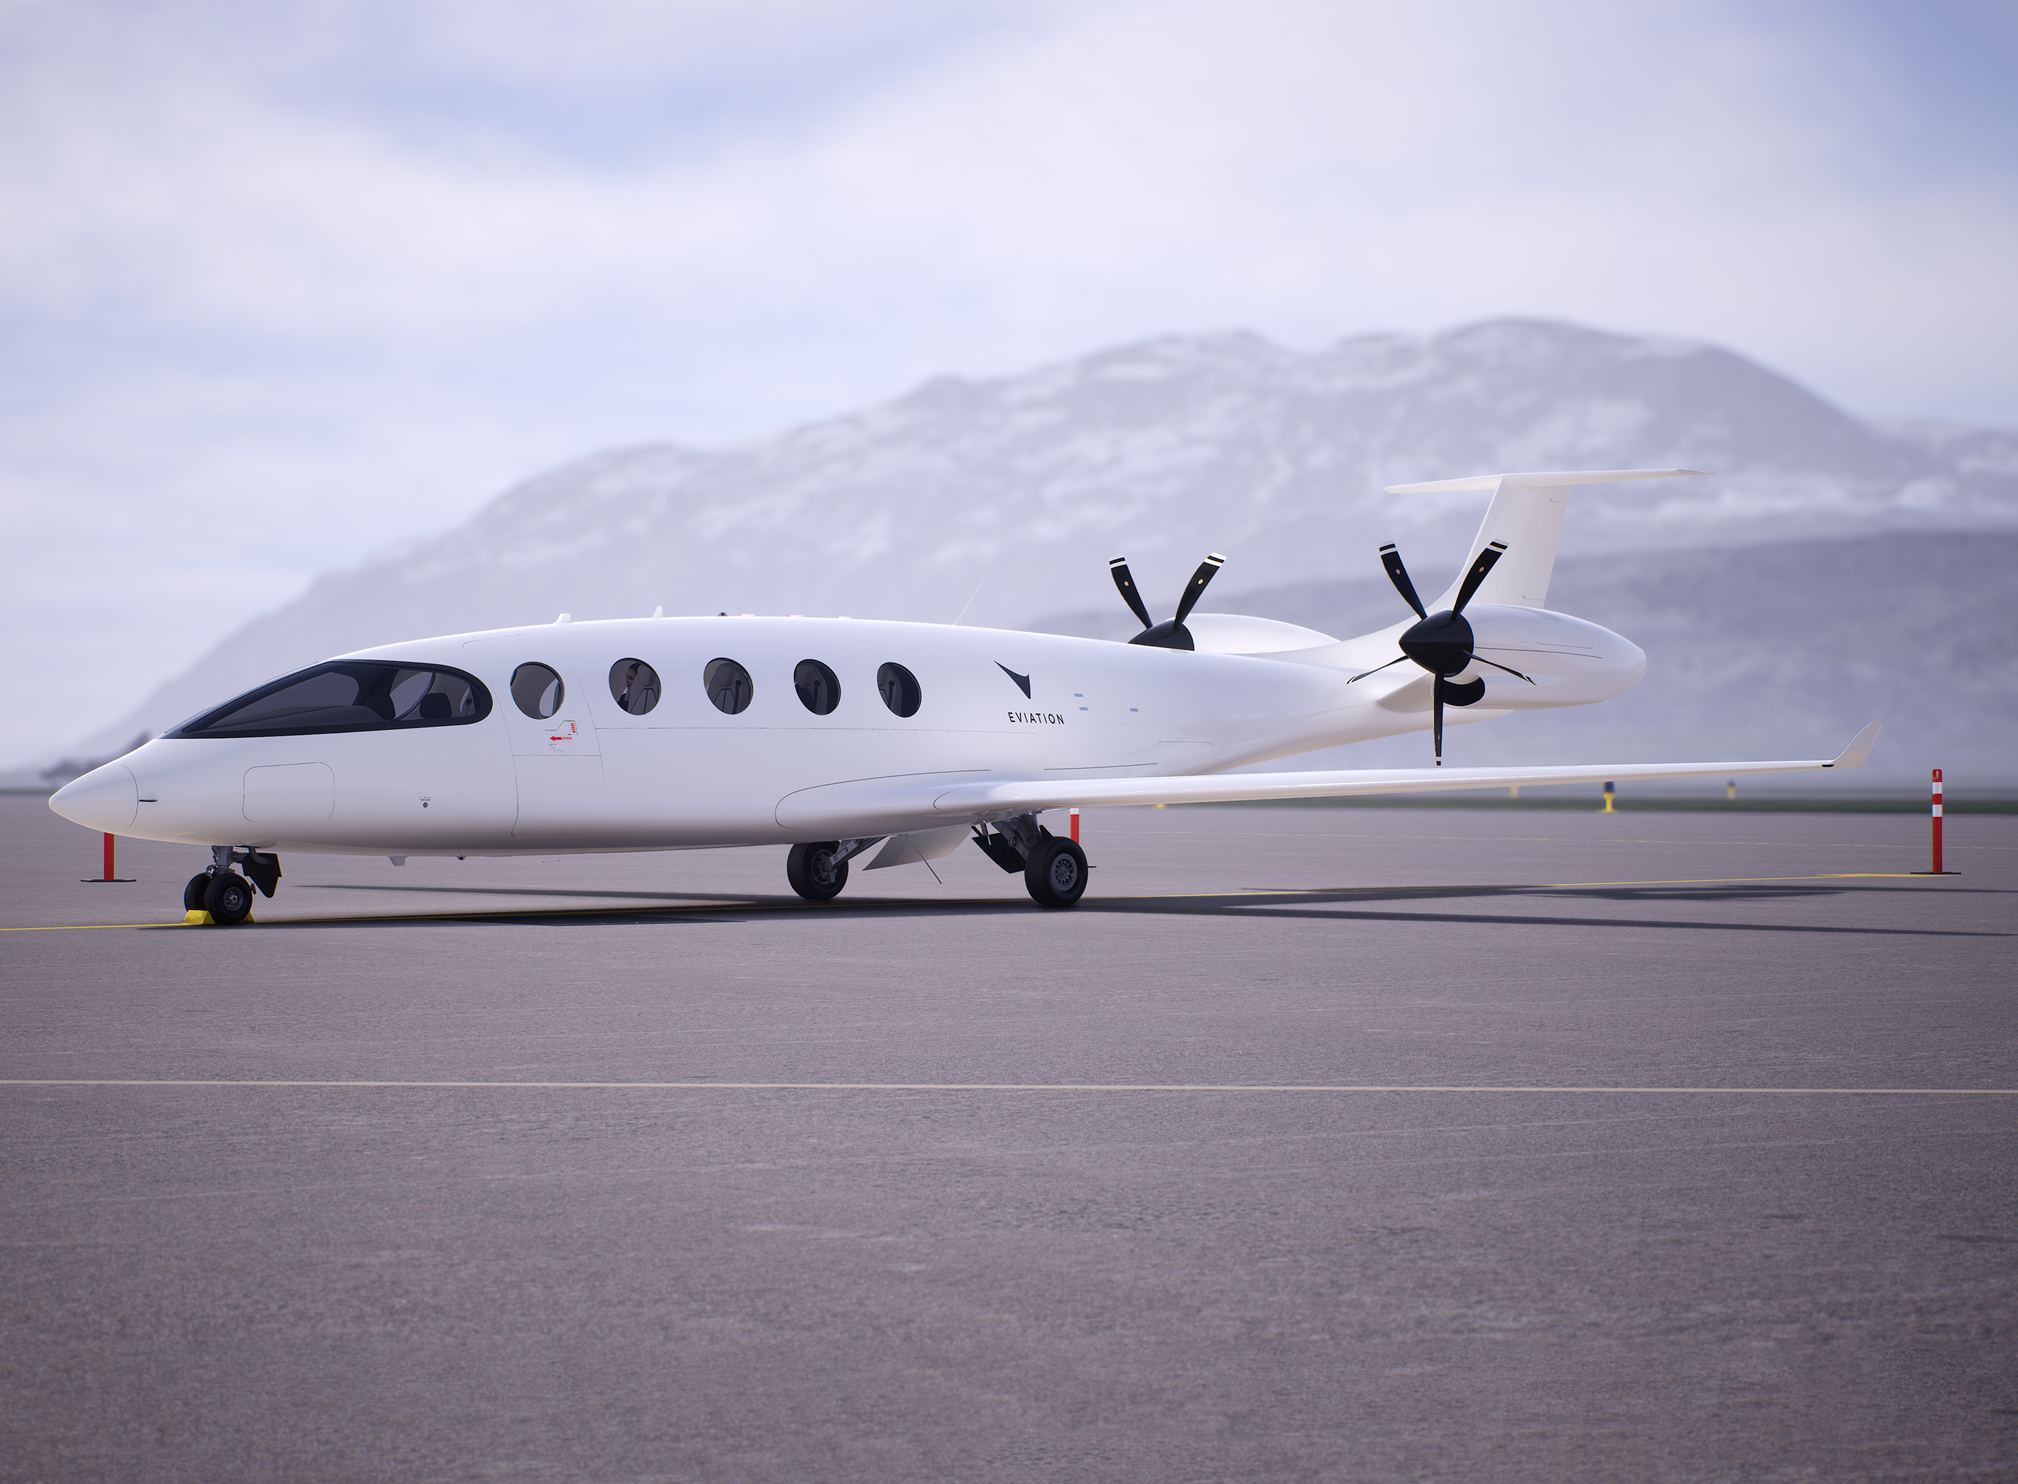 eviation's Alice is an all electric plane